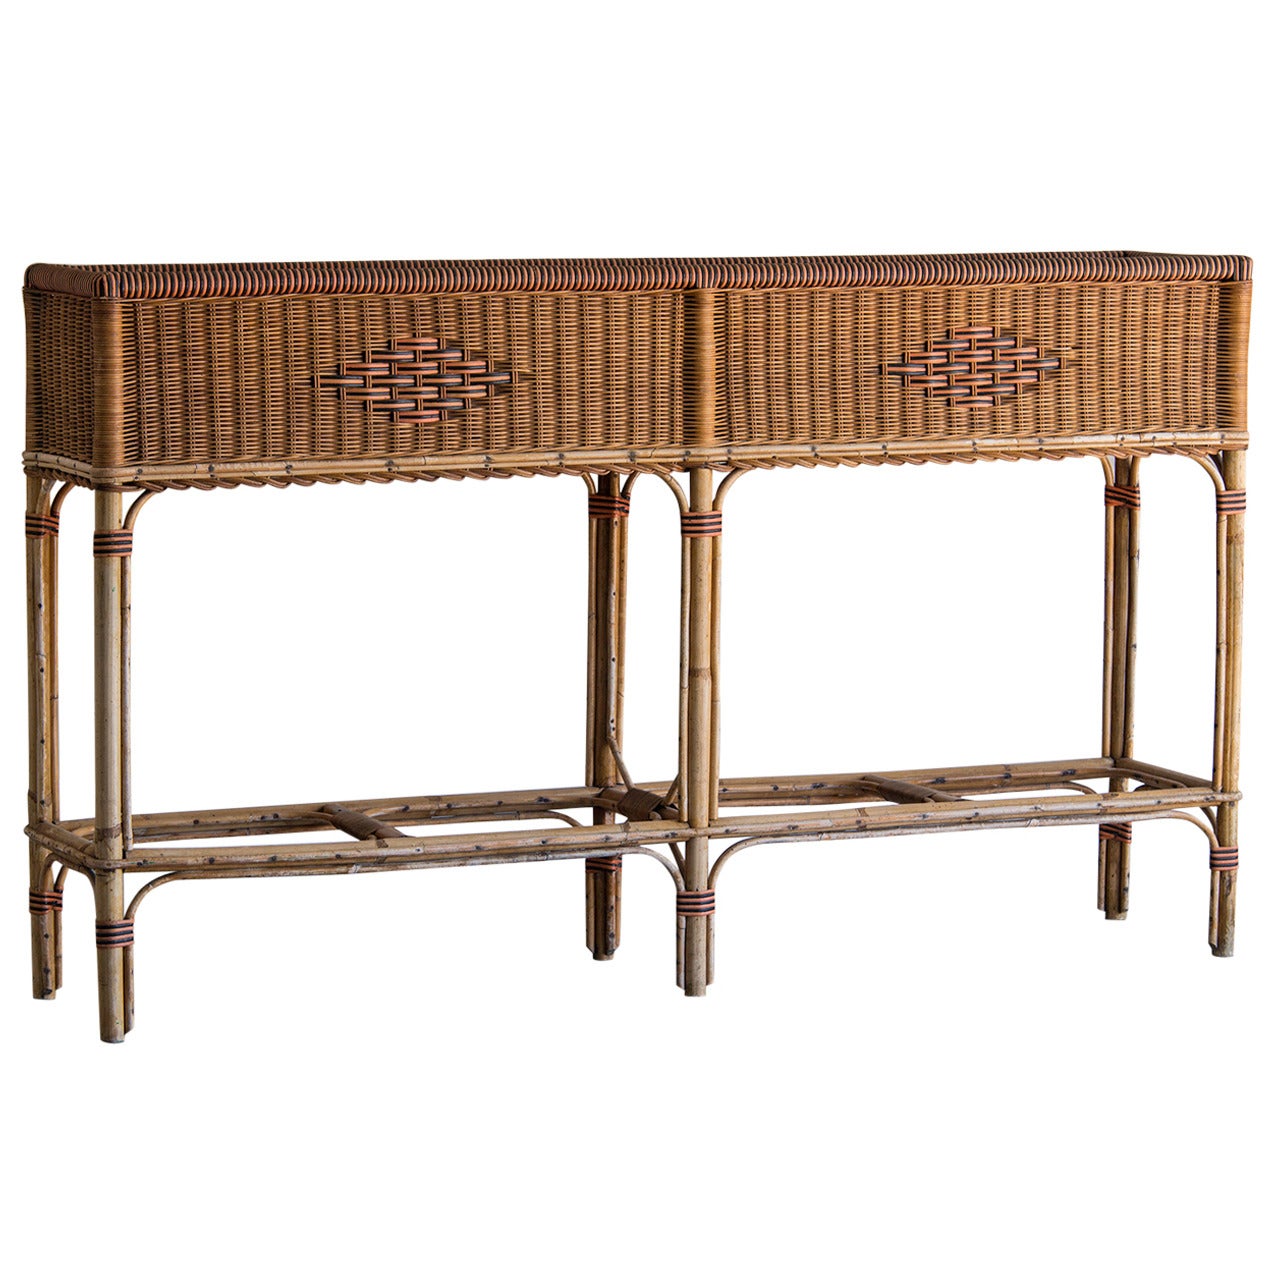 Vintage Bamboo and Woven Rattan Grand Scale Jardiniere, France circa 1940